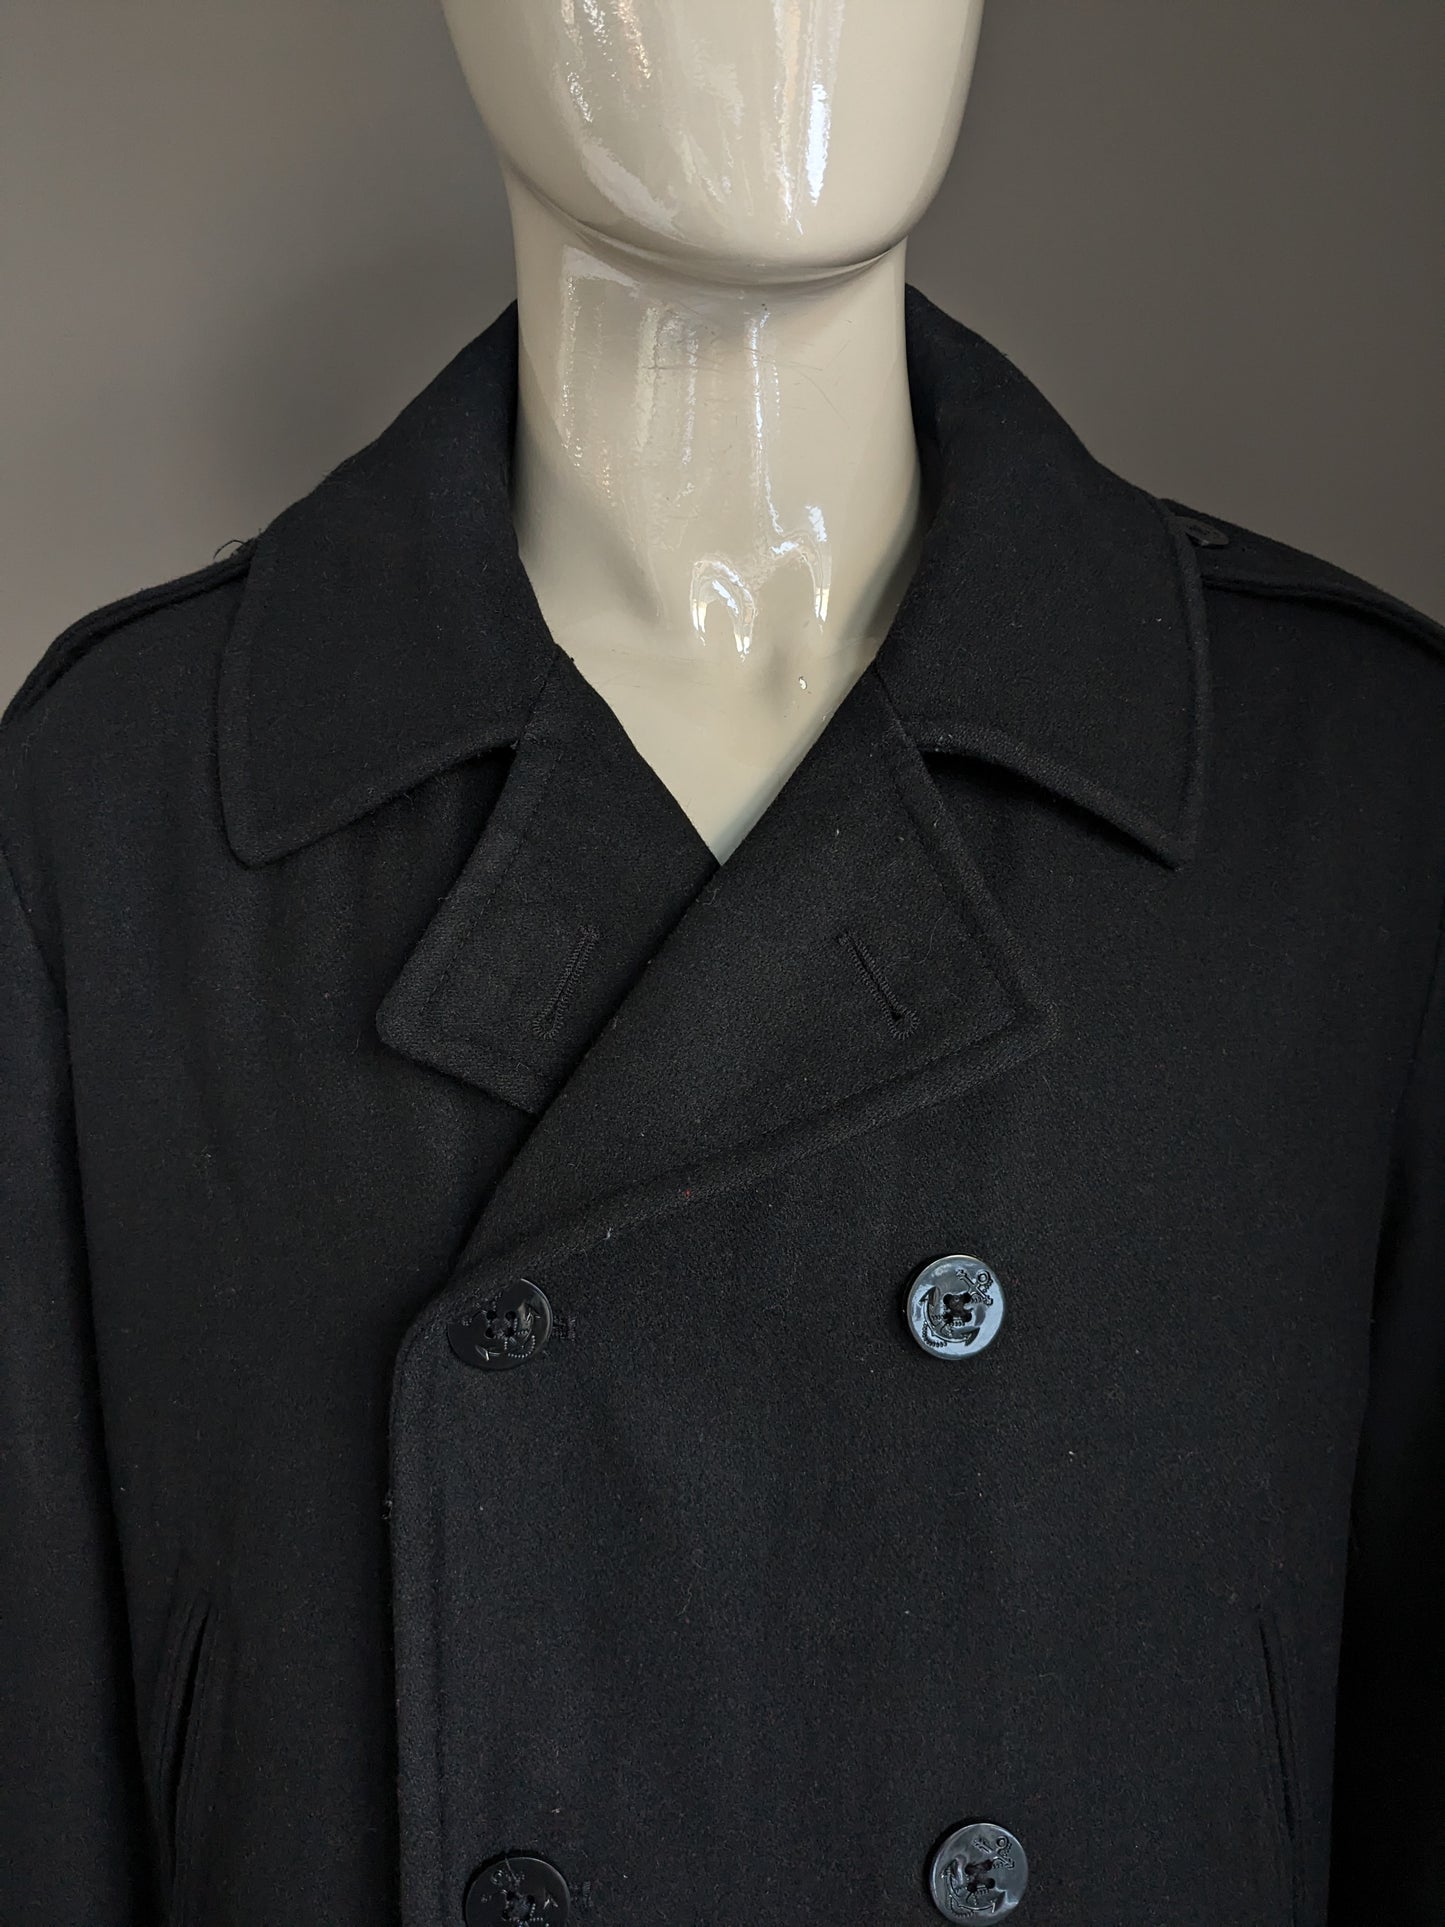 Nautica woolen jacket with larger buttons. Black colored. Size 2XL / XXL.